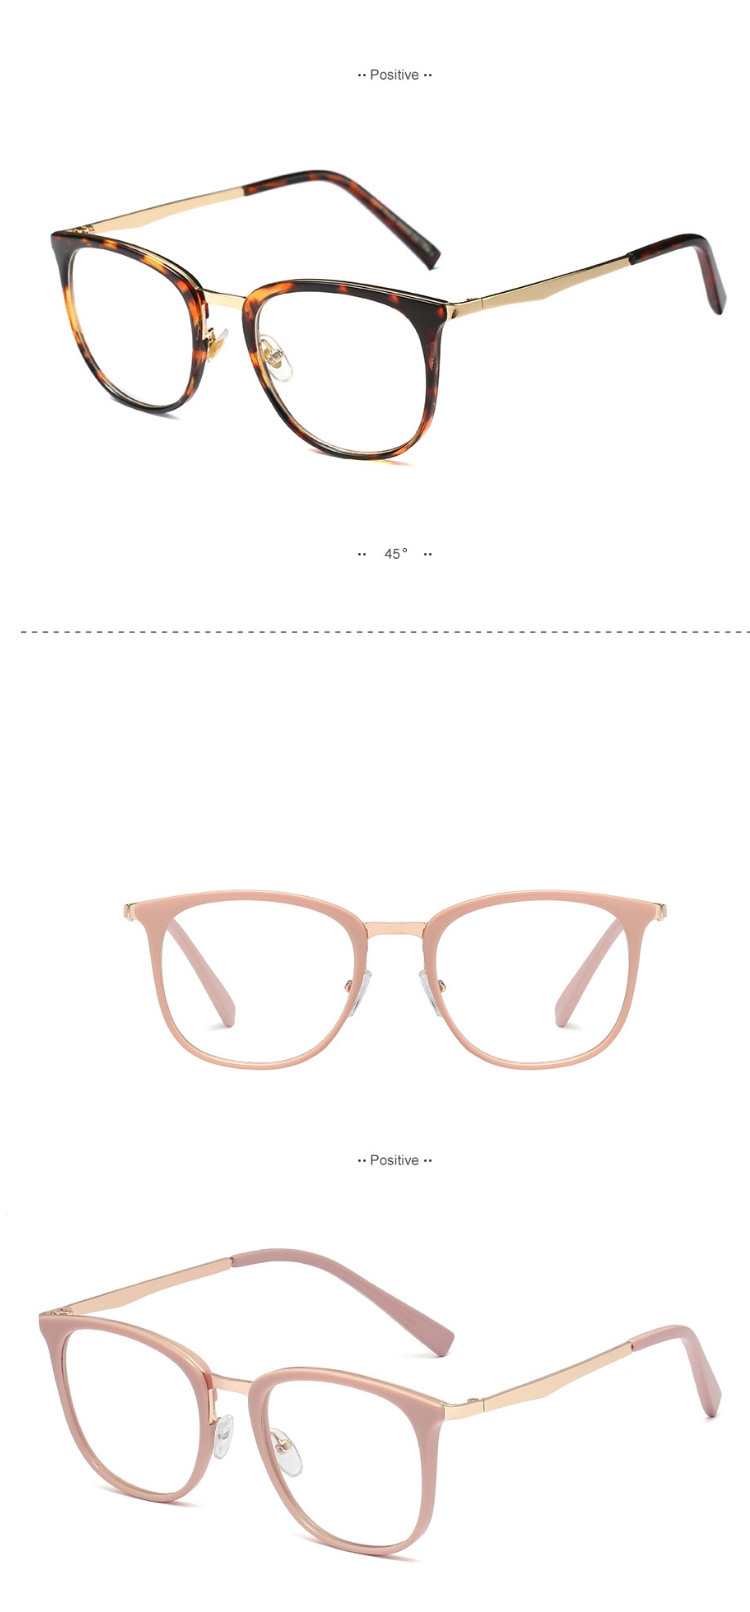 Fashion C5 White/transparent Ultra-light Can Be Equipped With Myopia Round Frame,Fashion Glasses